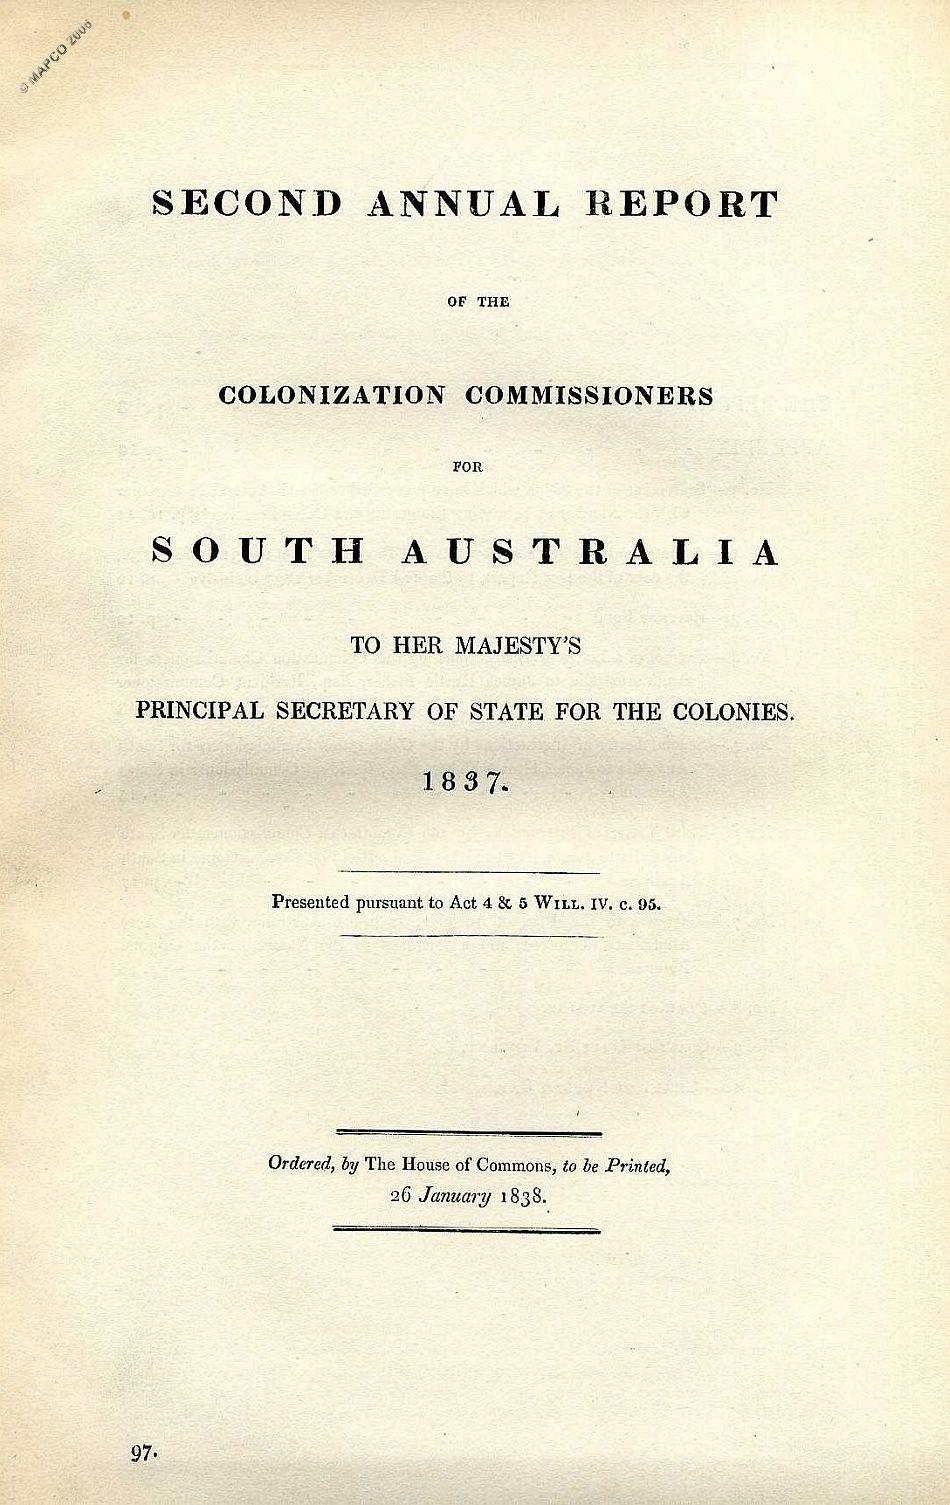 2nd Report Of The Colonization Commissioners For South Australia 1837